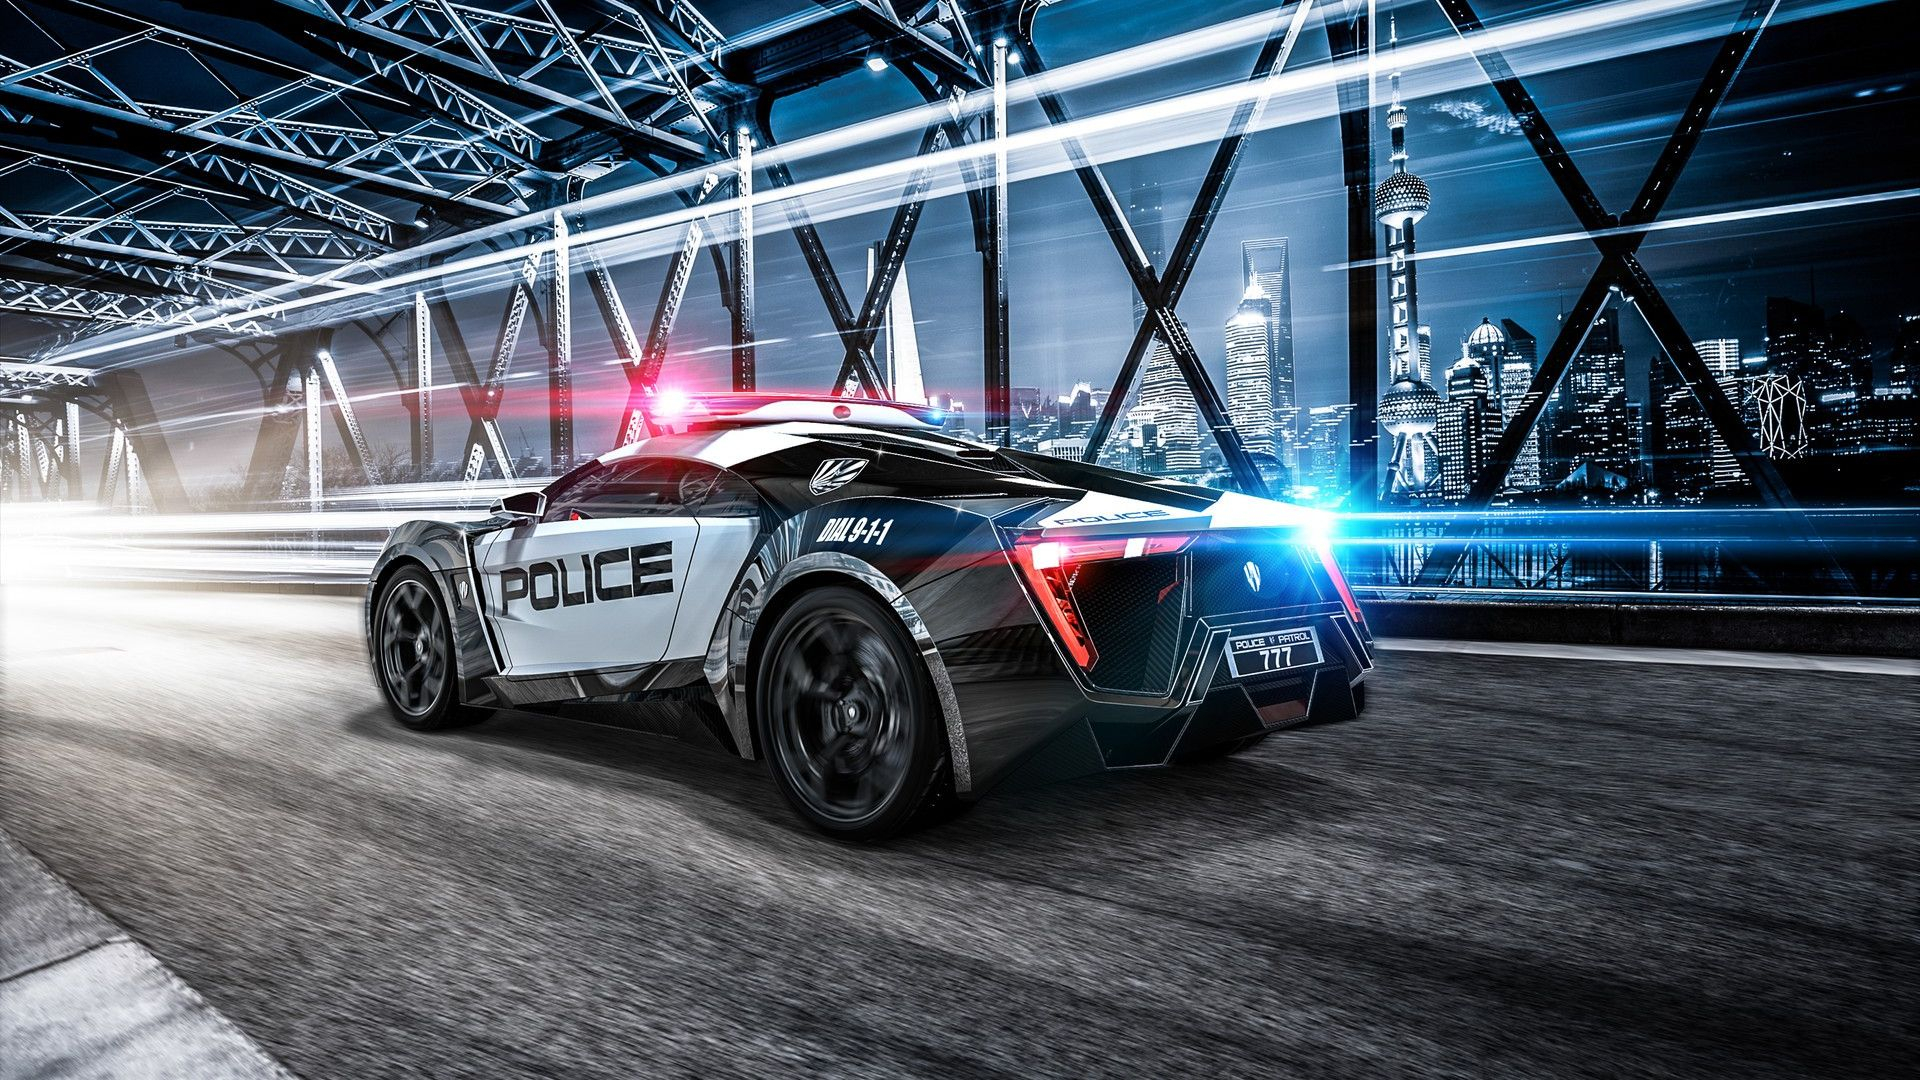 1920x1080 Desktop Wallpaper Police Car From Video Game, Hd Image, Picture, Background, Pnen4y